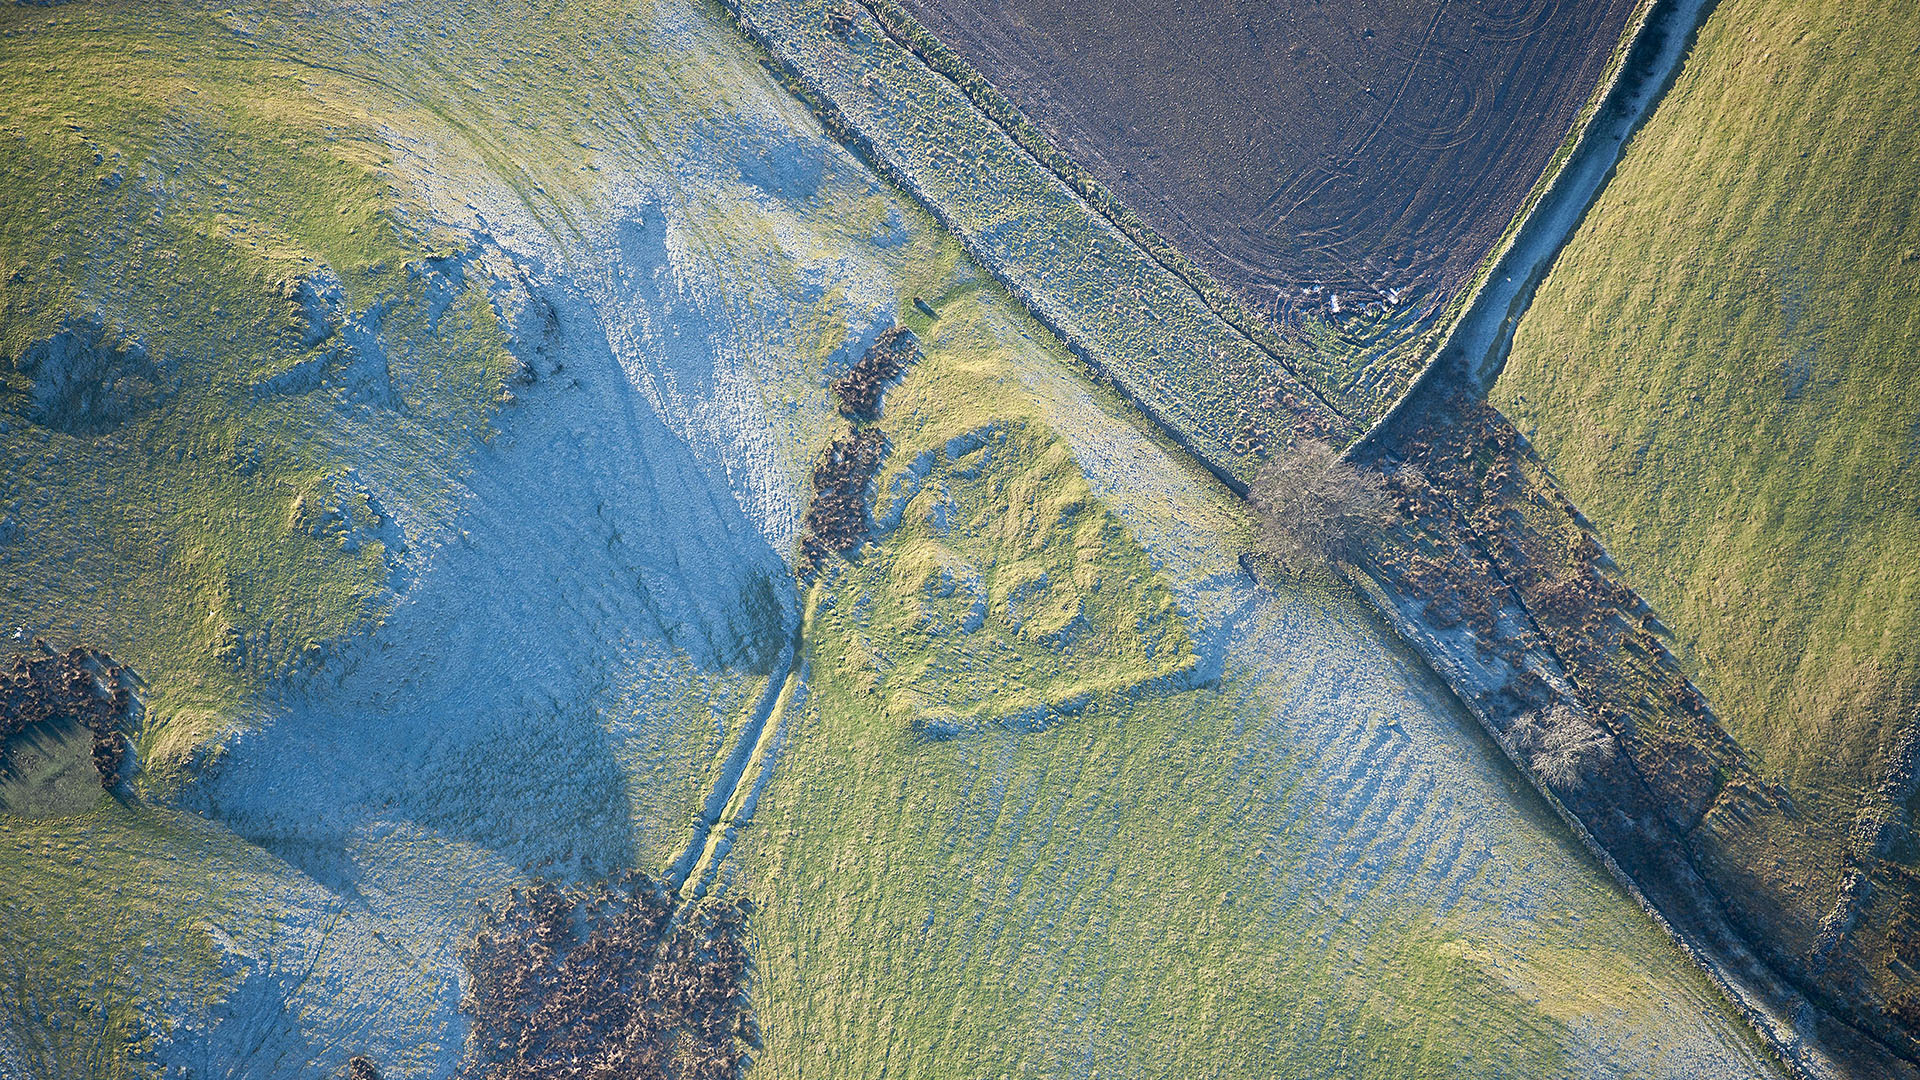 Aerial view of Iron Age Roman settlement at Gillsmere, Cumbria